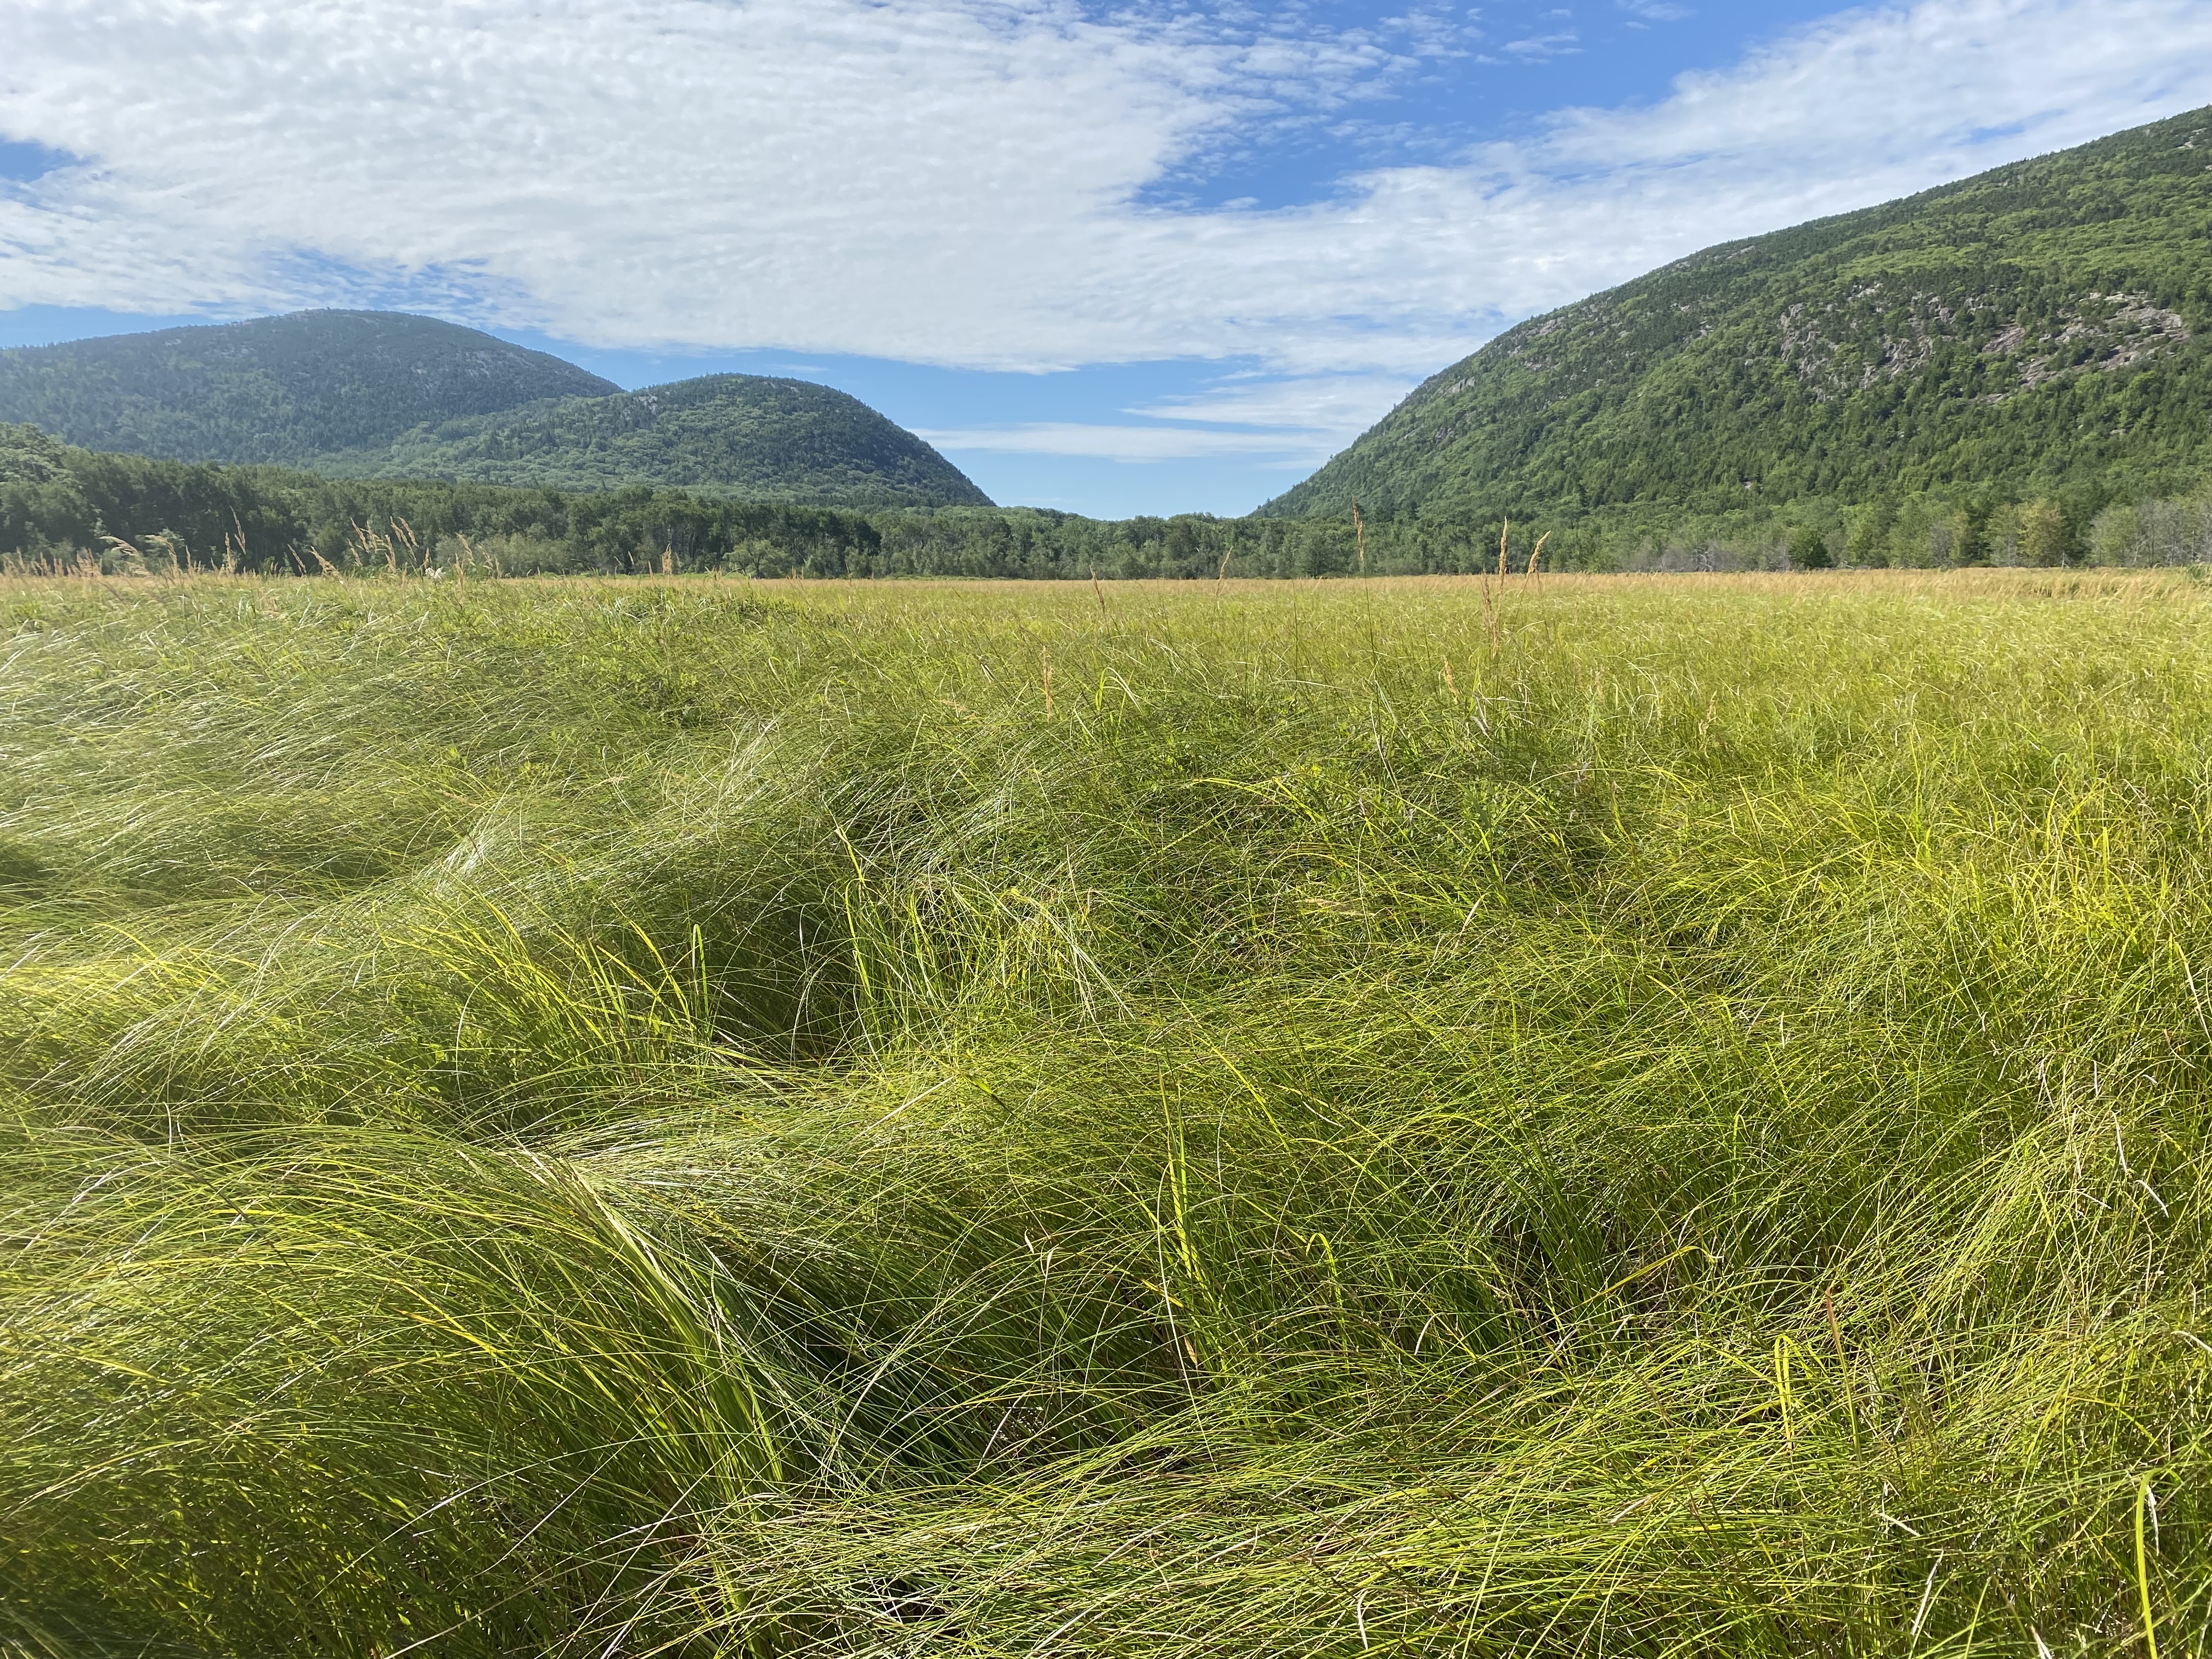 Image overlooks tall grass across a sweeping field, embedded between tree covered mountains.